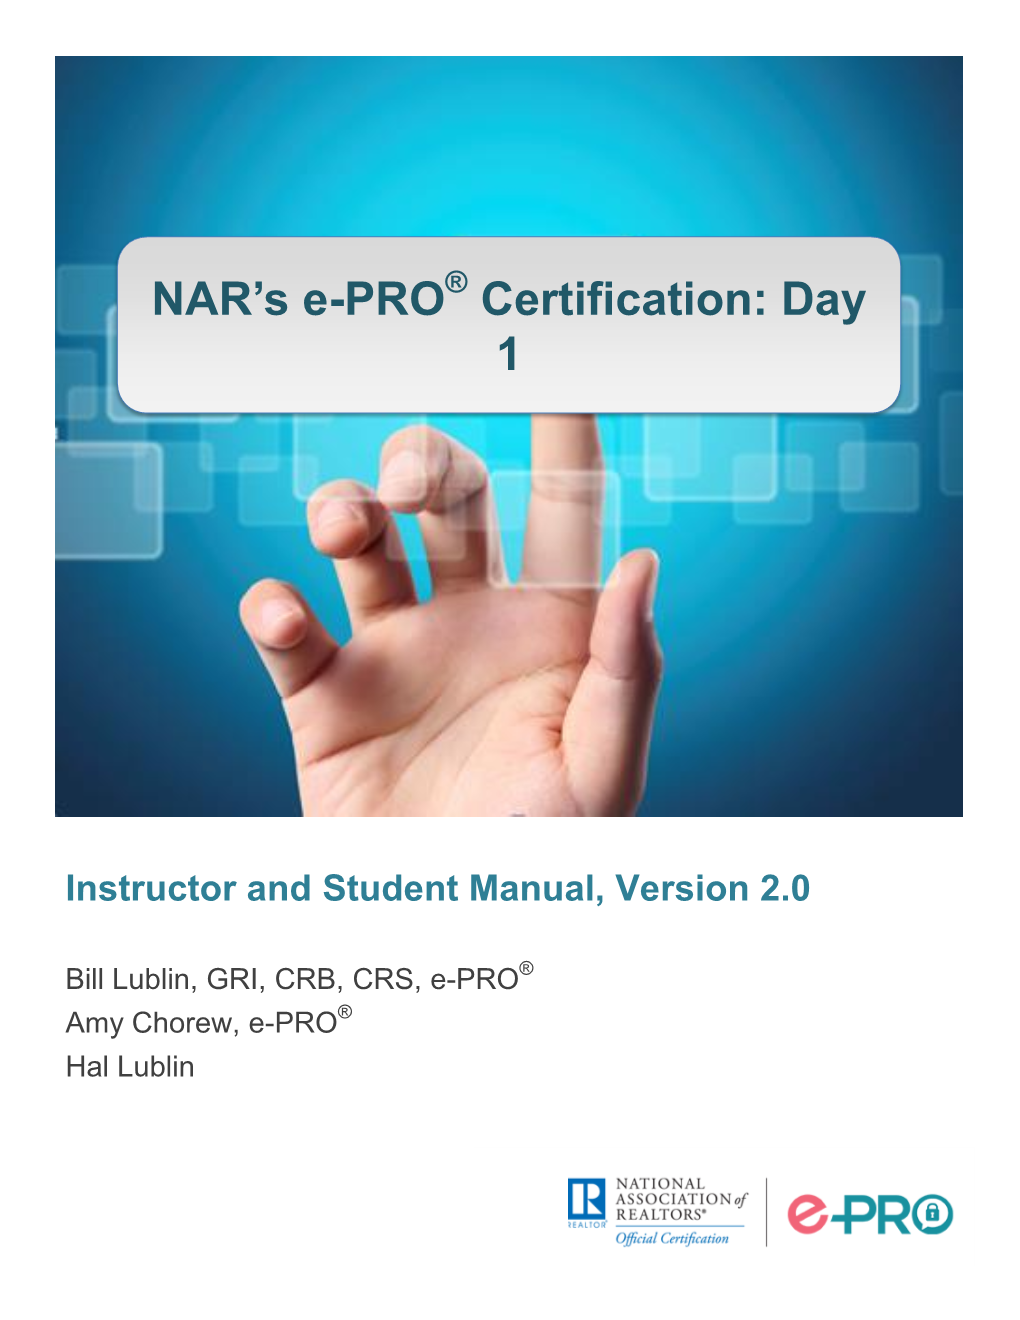 NAR's E-PRO® Certification: Day 1